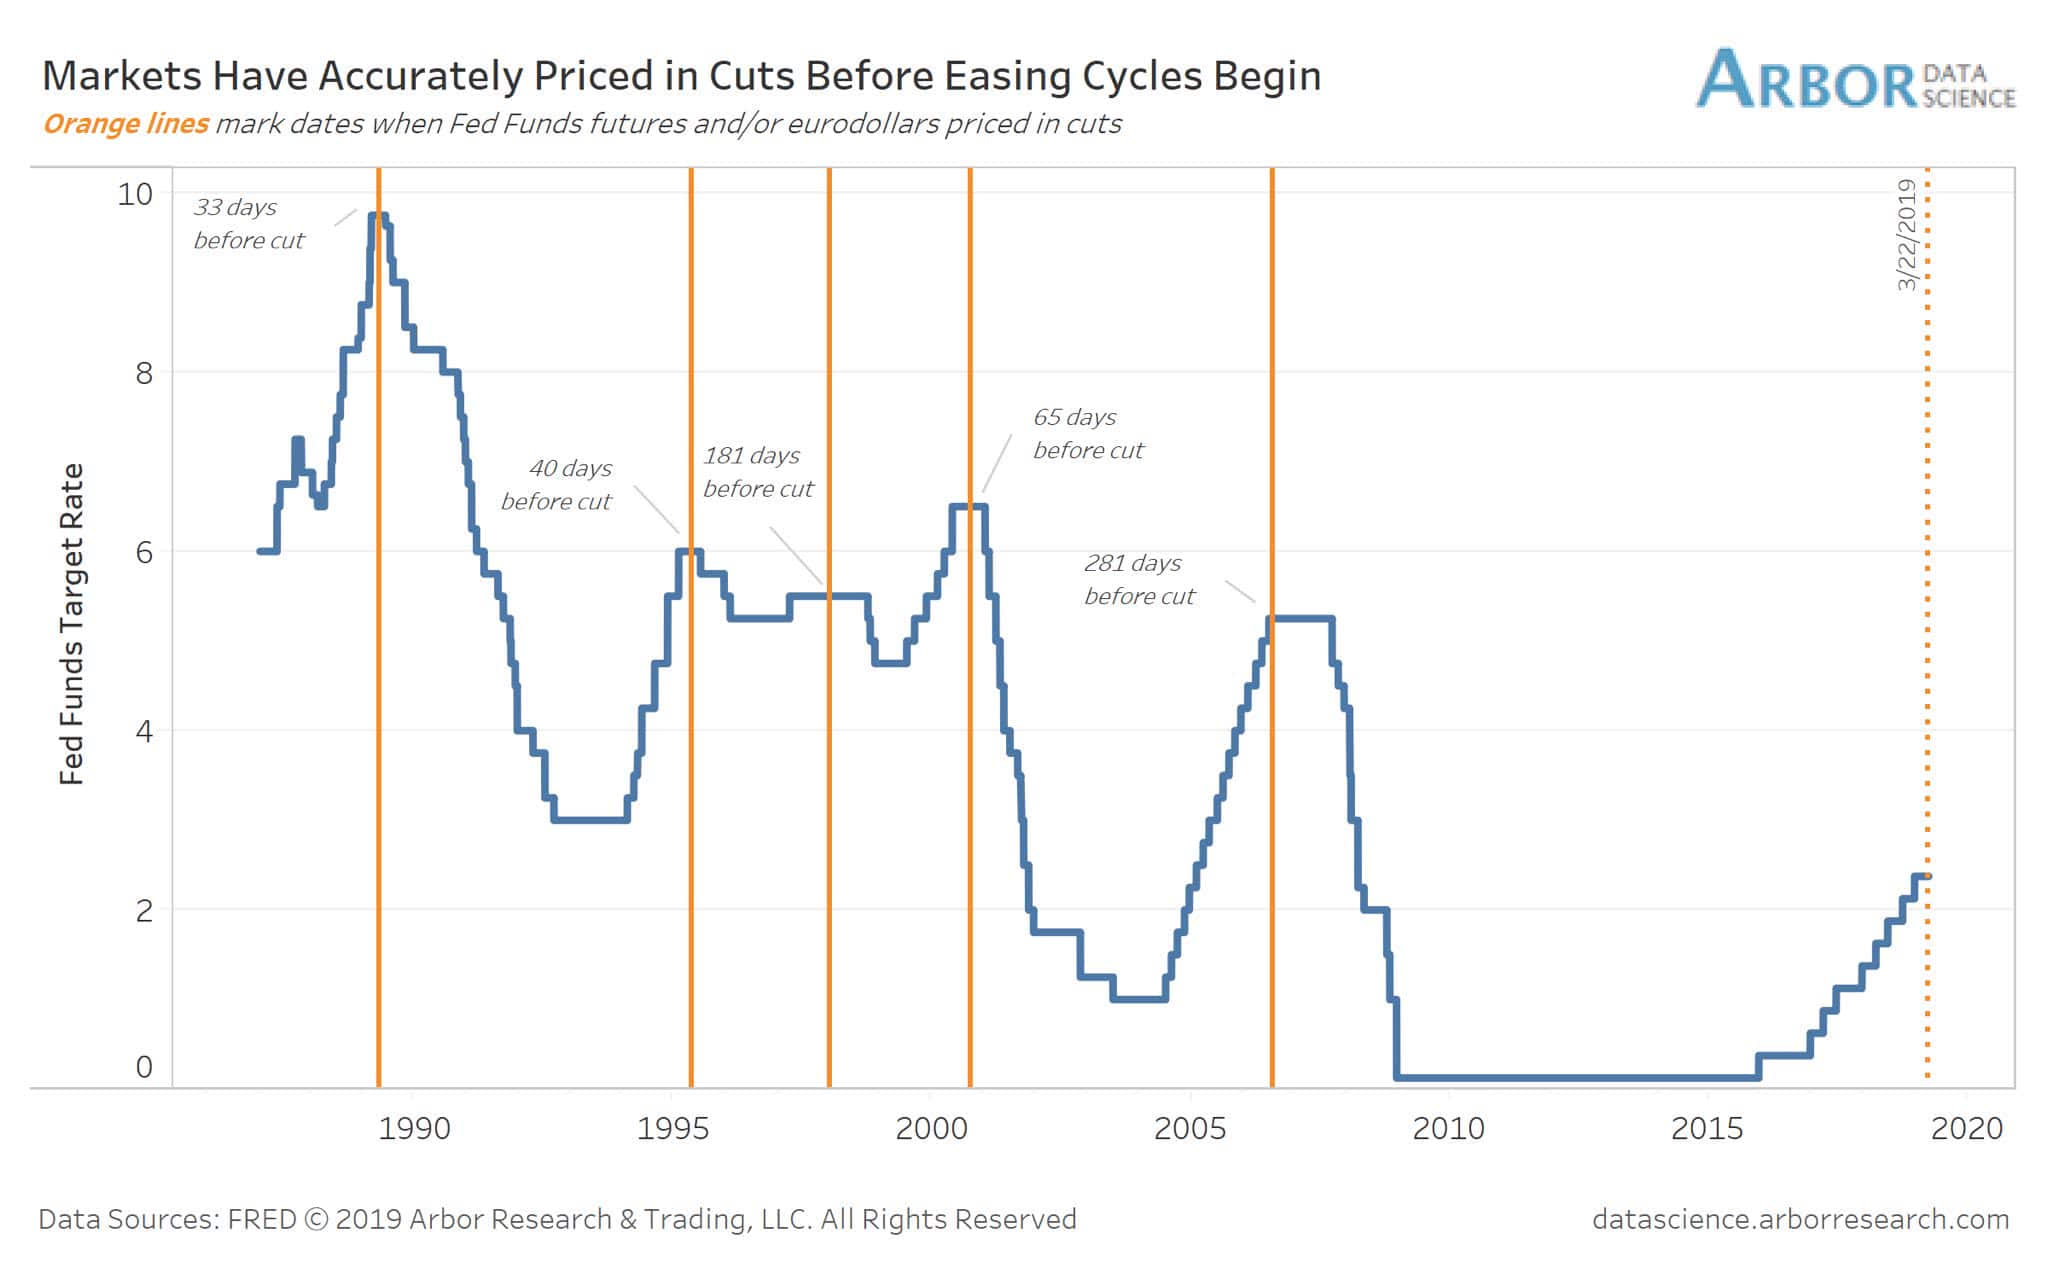 Markets Have Accurately Priced in Cuts before Easing Cycles Begin